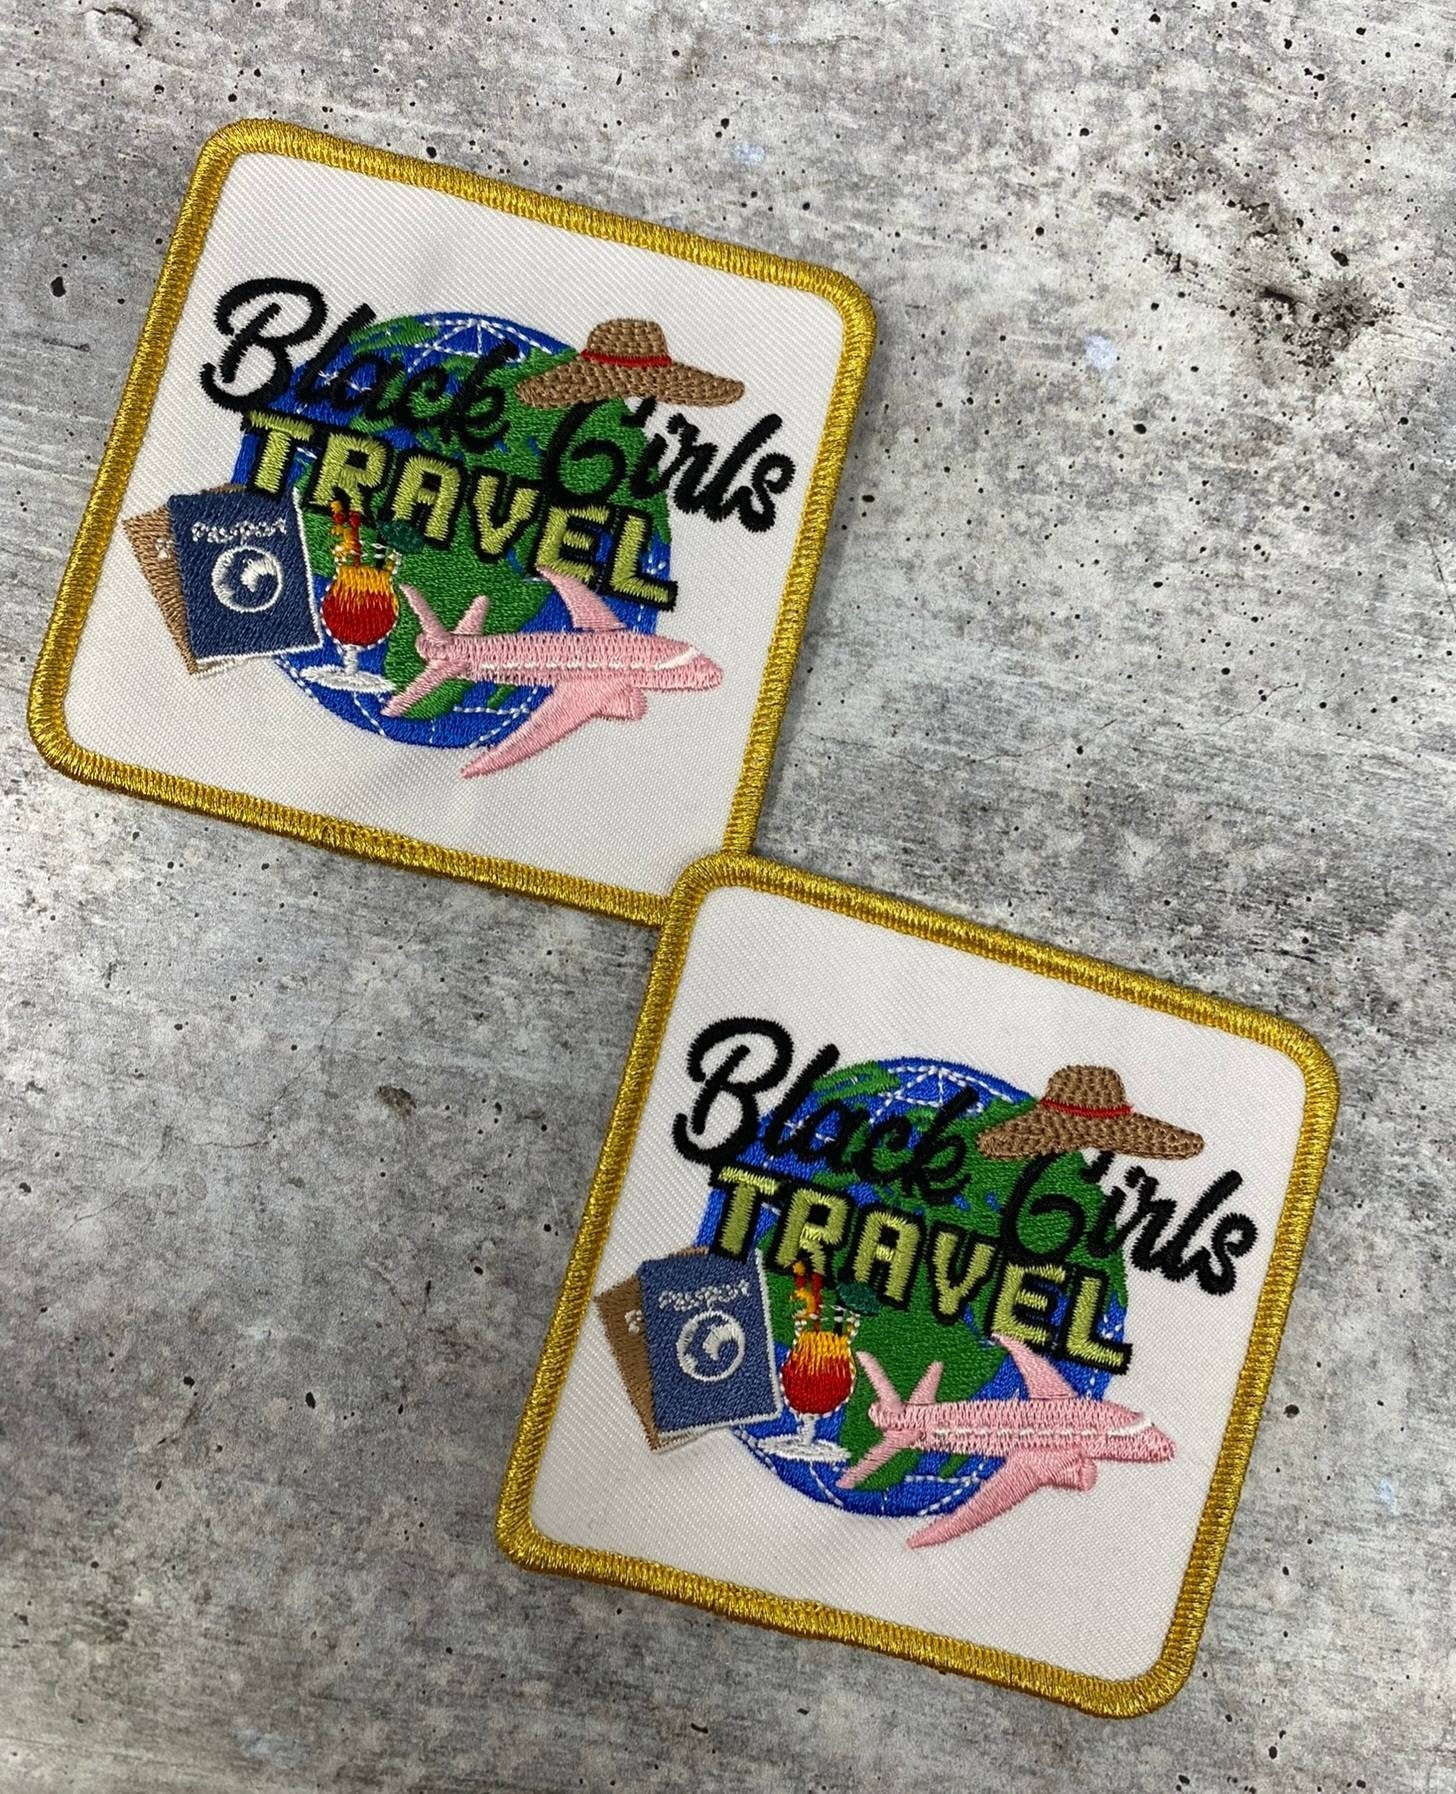 Wanderlust "Black Girls Travel" Iron-on Patch, Size 3"x3" with Metallic Gold, Embroidered Patch for Jackets, Hats, & Crocs, Small Patch